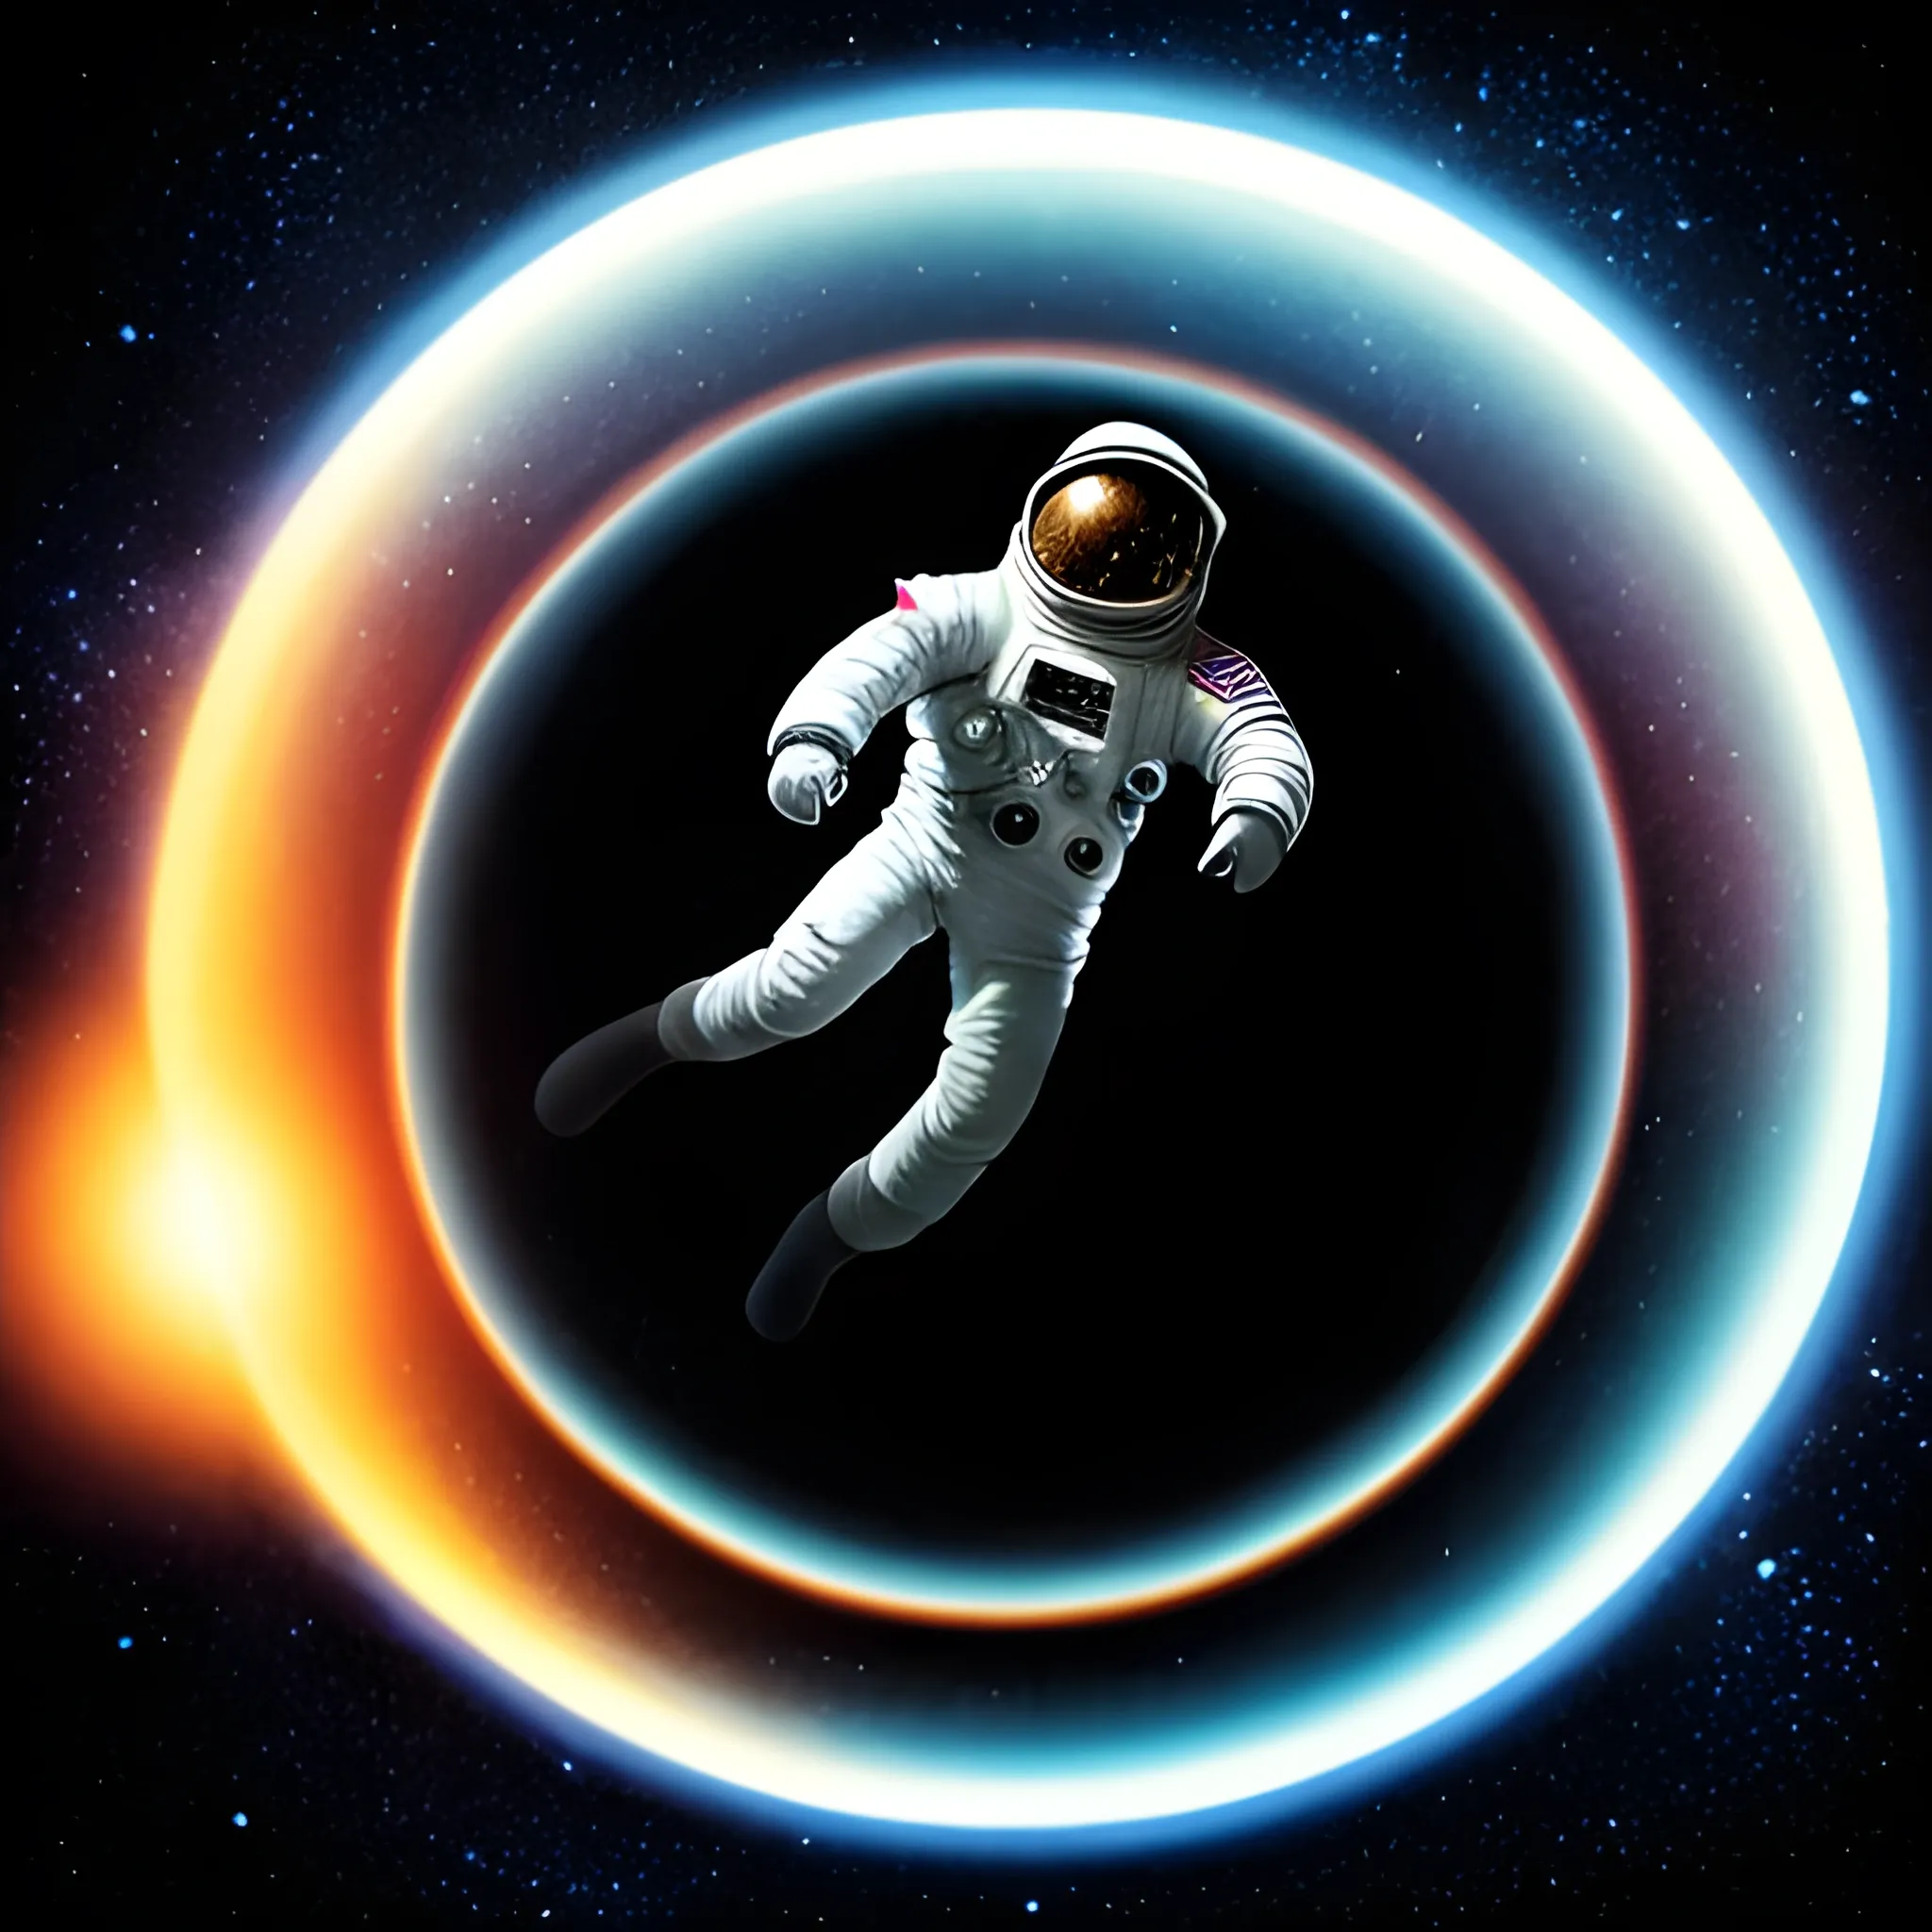 a dark astronaut playing with a soccer ball in foot in a space floating, planets, and beautiful galaxy view, tripping, near a black hole, no flags



